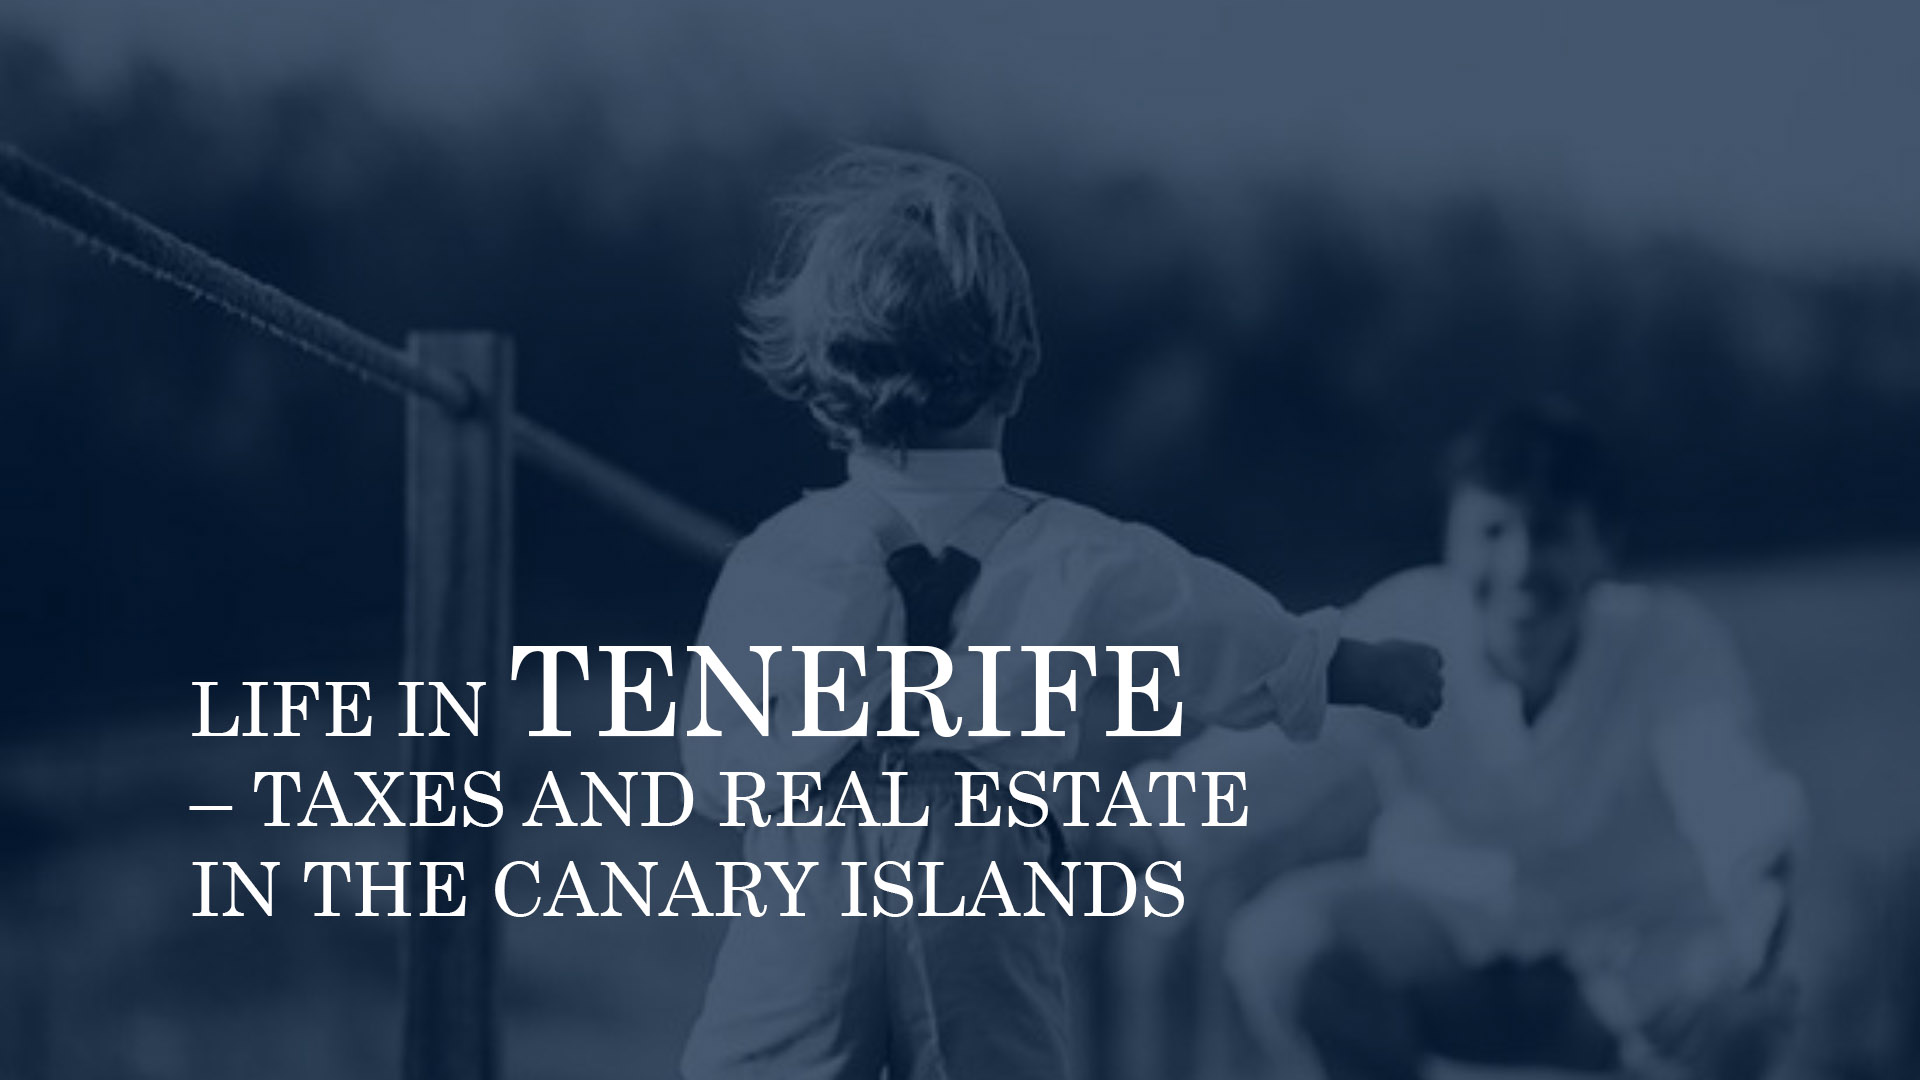 LIFE IN TENERIFE – TAXES AND REAL ESTATE IN THE CANARY ISLANDS